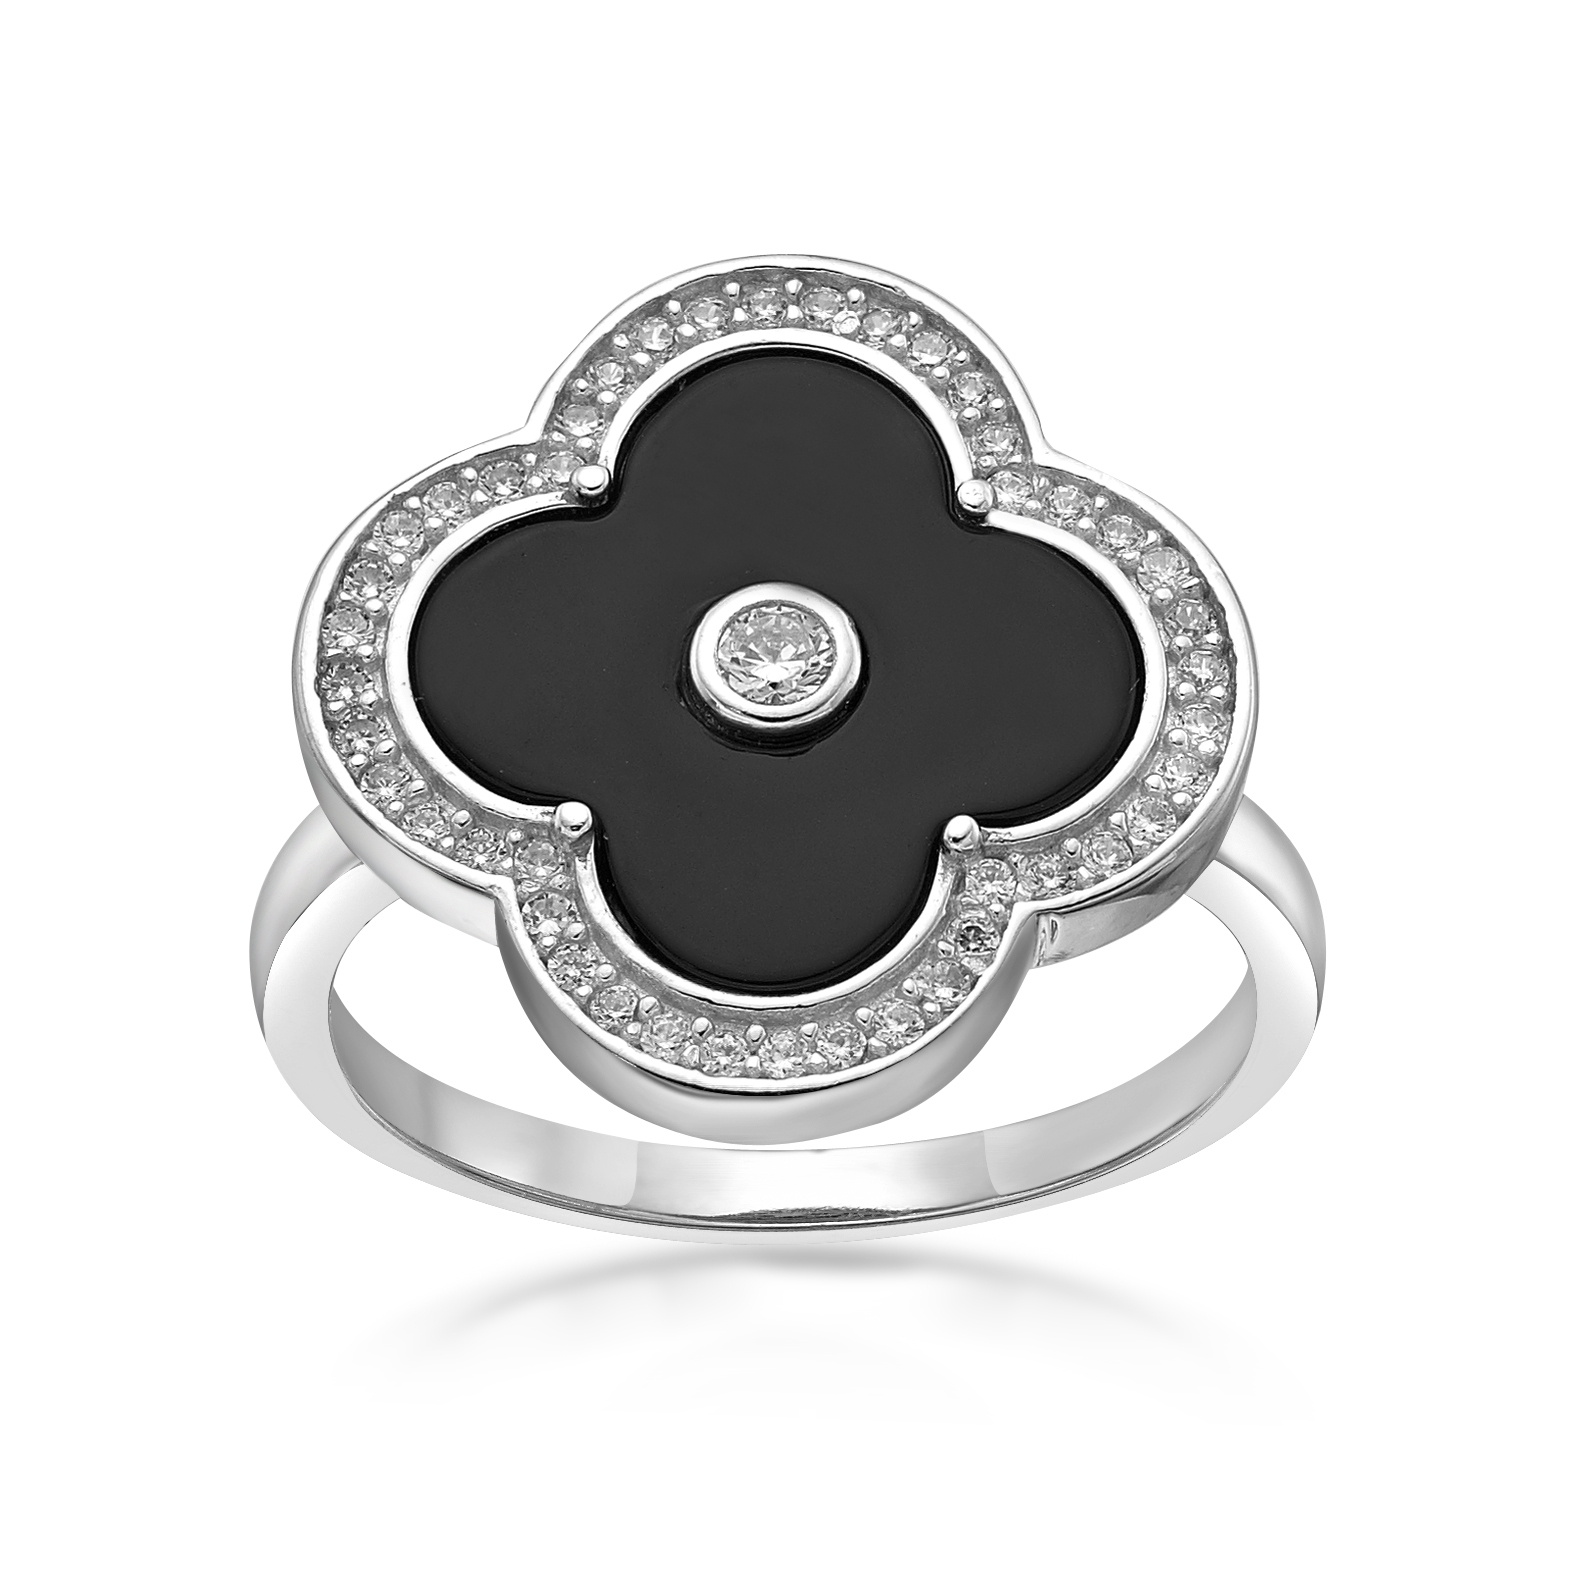 Lavari Jewelers Women's Black Onyx Flower Silver Layered Ring, 925 Sterling Silver, Cubic Zirconia